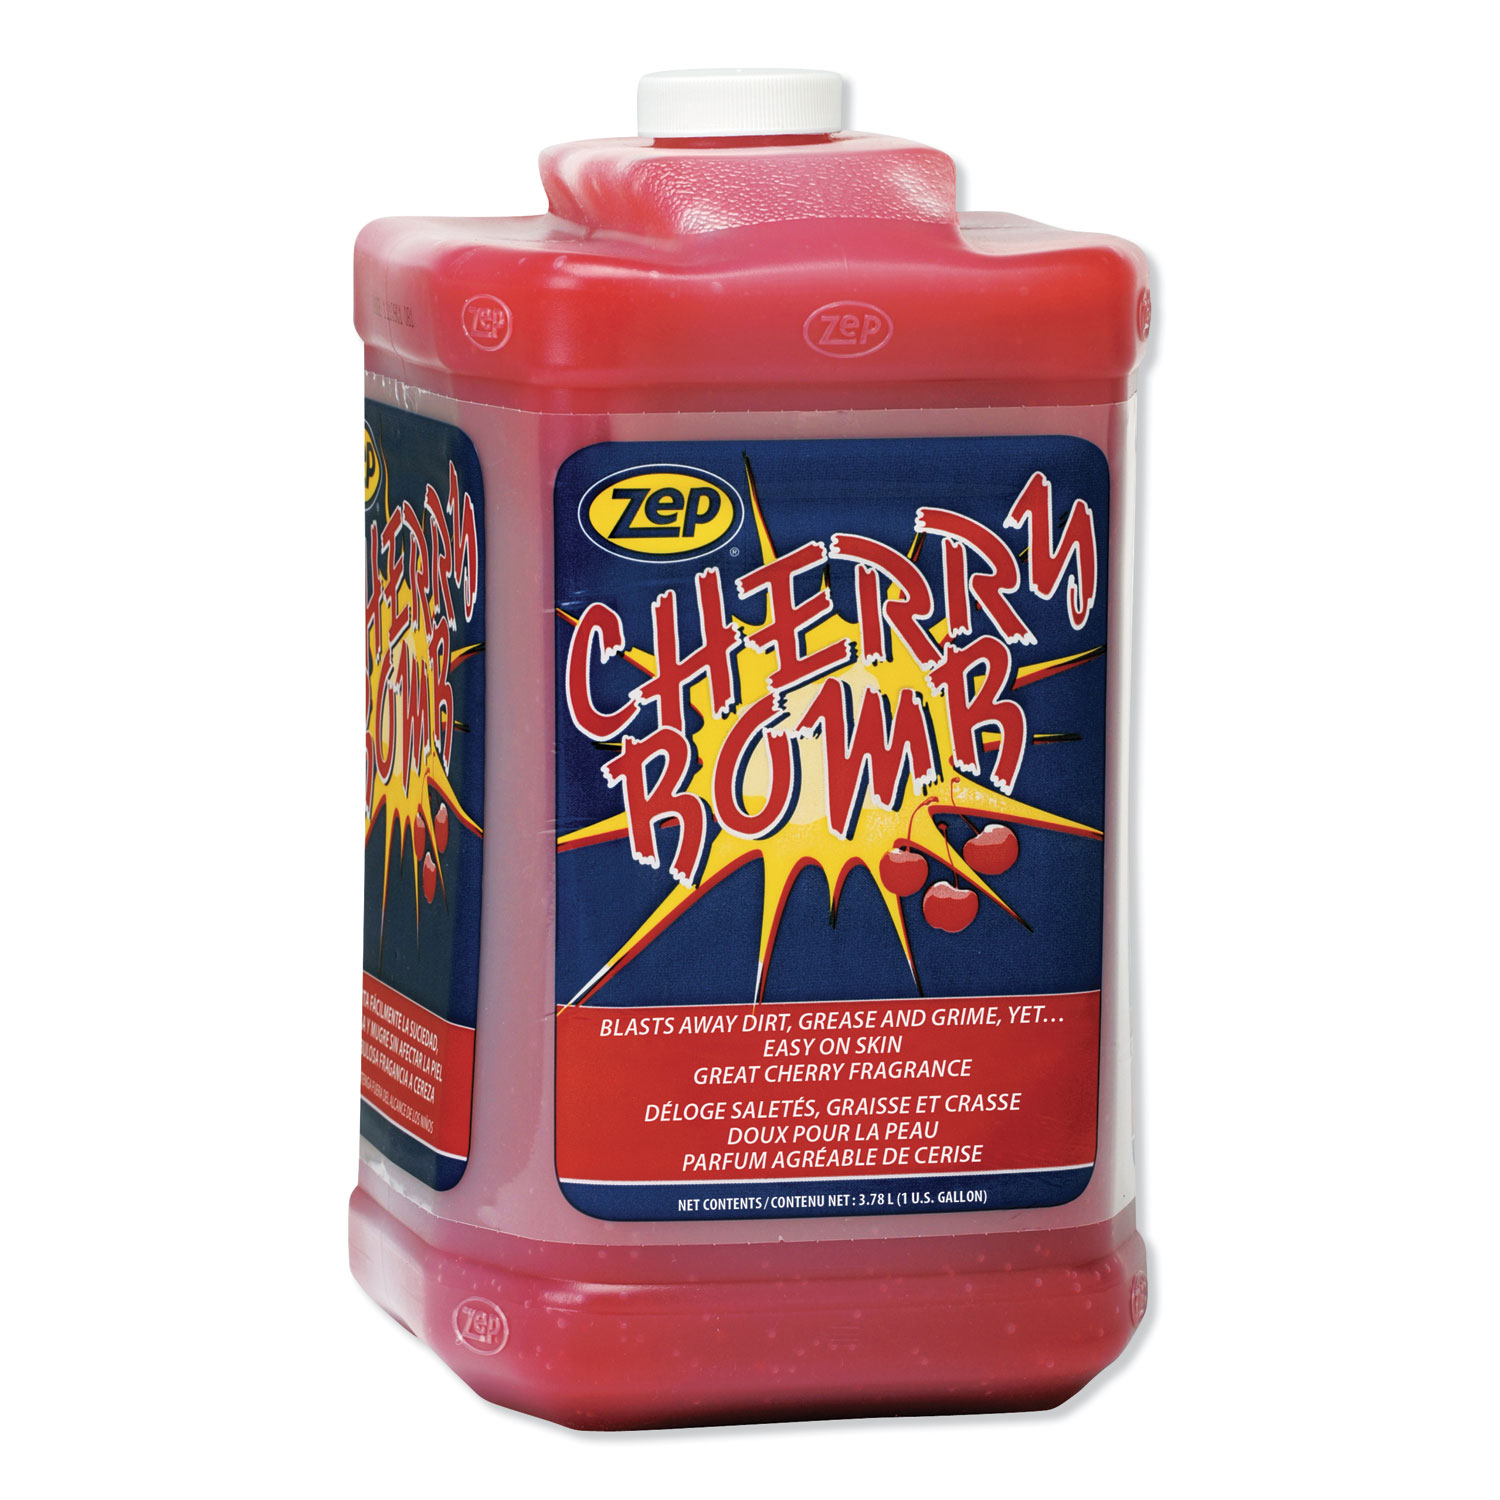 Zep Cherry Bomb Hand Cleaner Cherry Scent 1 Gal Bottle Janeice Products Co Inc